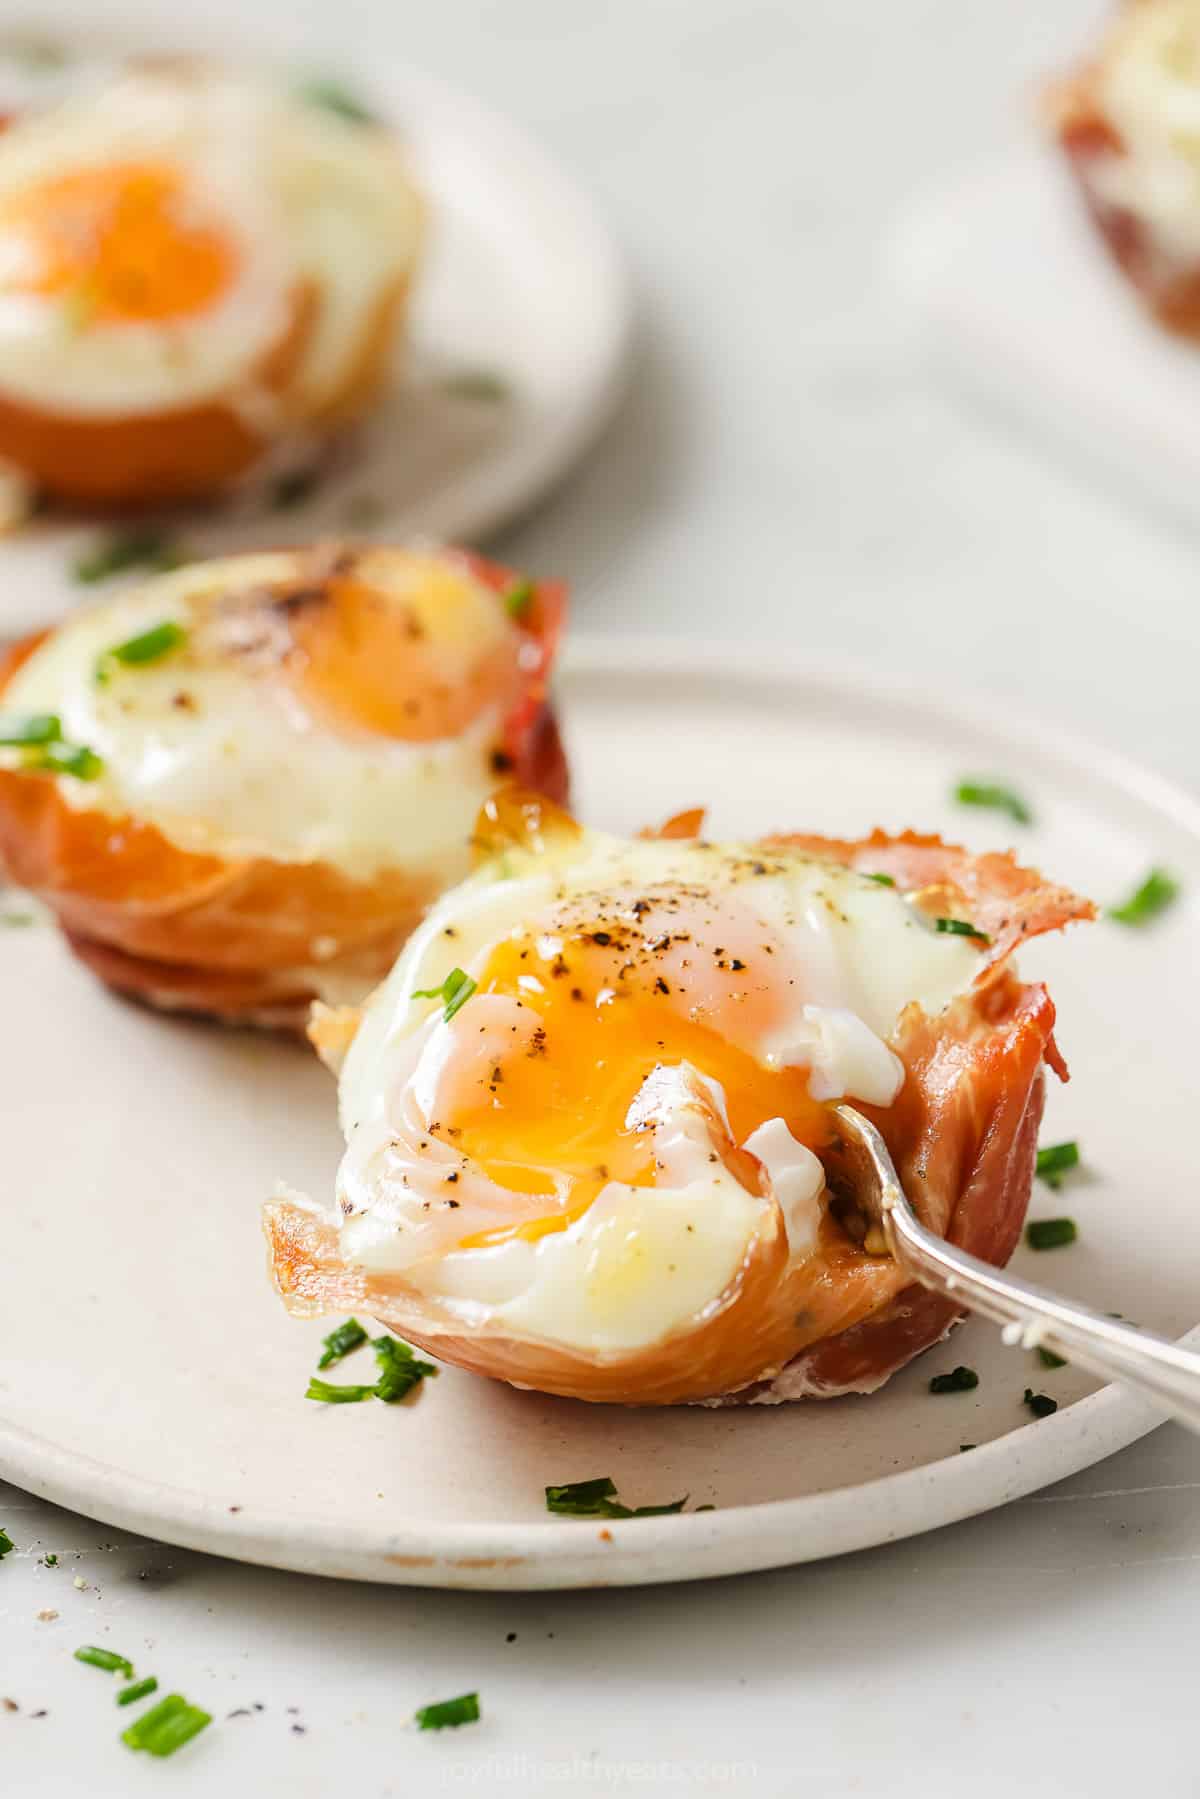 Use a fork to dig into the ham egg cups to reveal the runny yolk. 